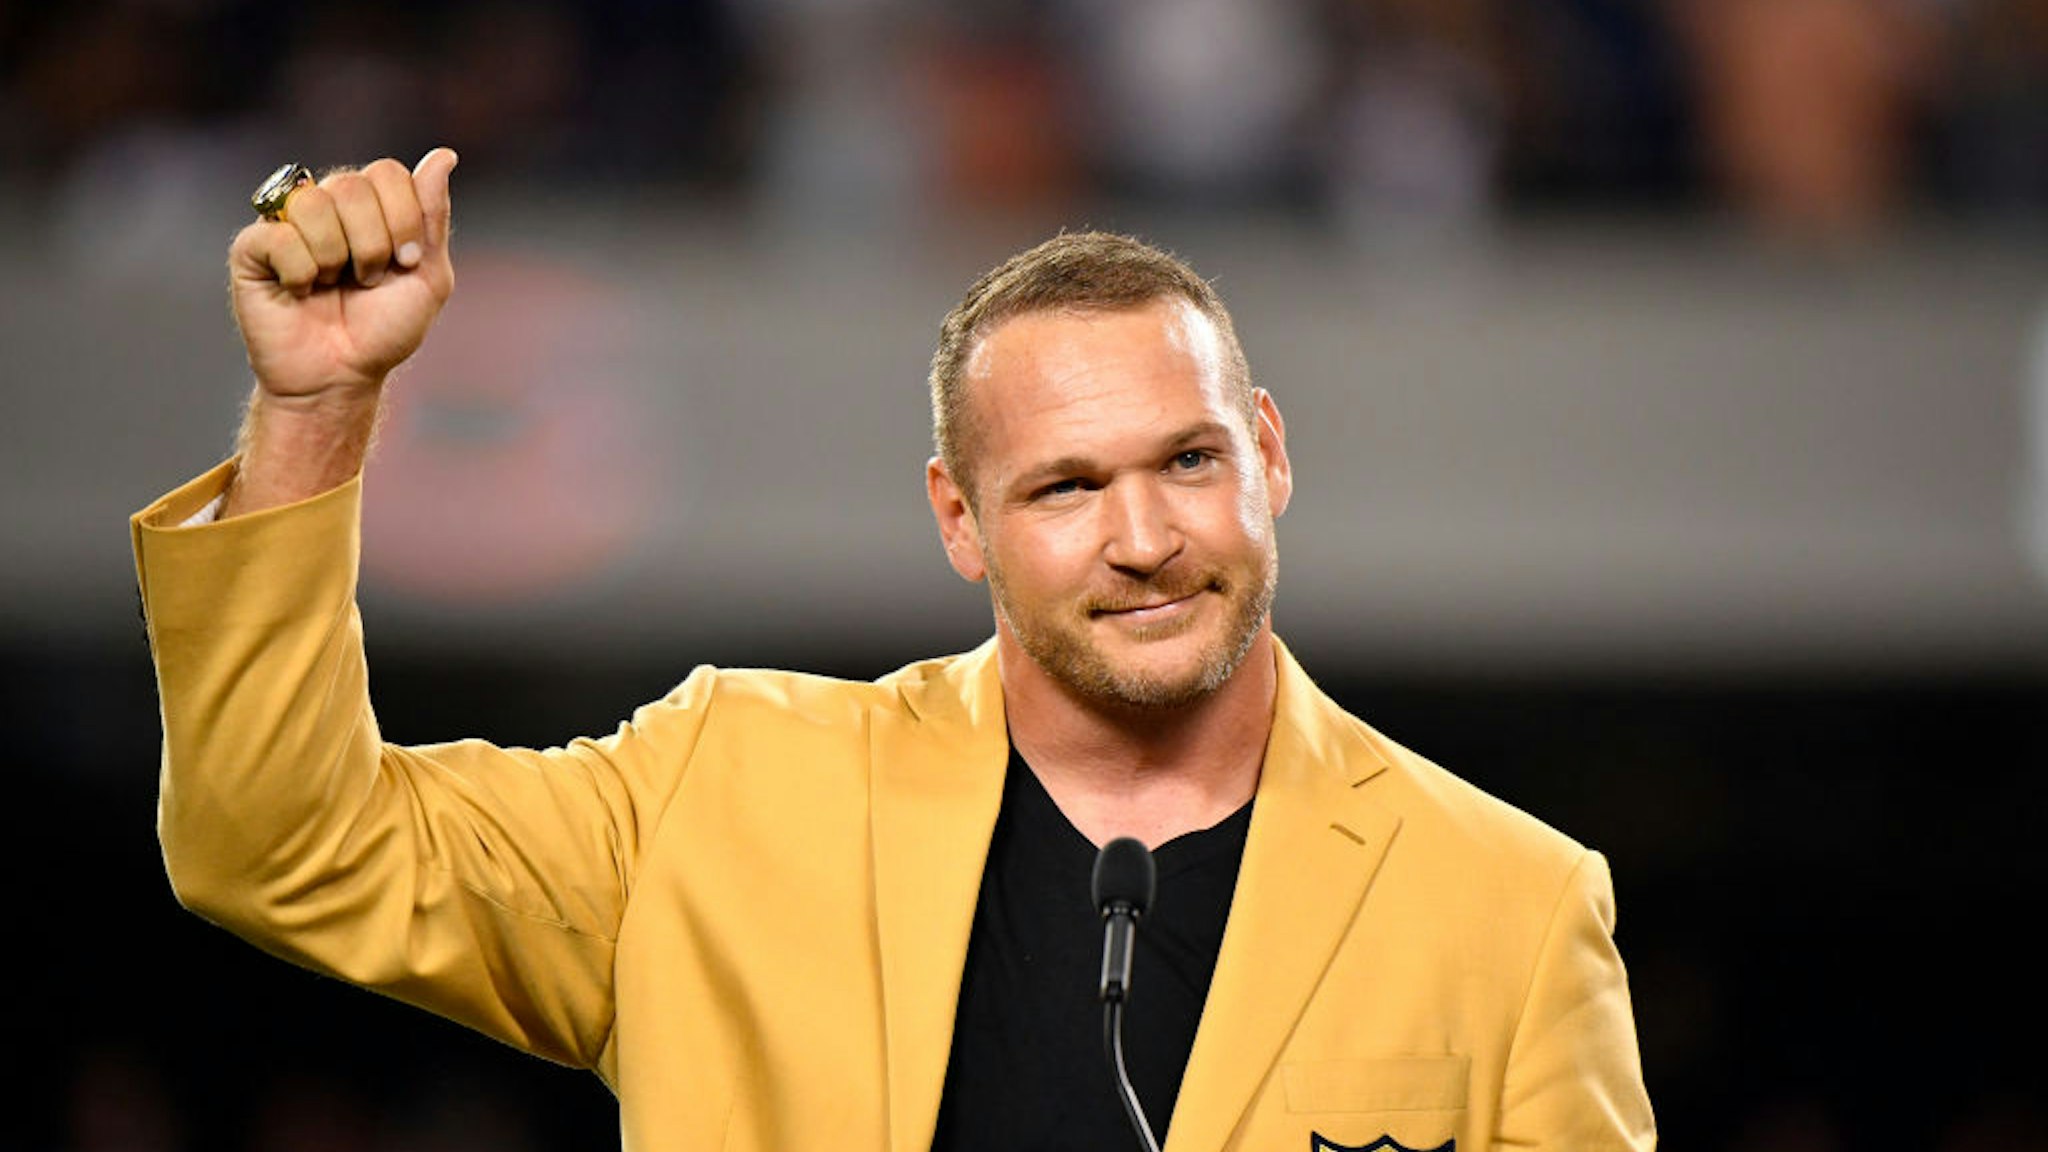 CHICAGO, IL - SEPTEMBER 17: Brian Urlacher is honored with a Ring of Excellence ceremony for his recent induction into the Hall of Fame at Soldier Field on September 17, 2018 in Chicago, Illinois. (Photo by Quinn Harris/Getty Images)